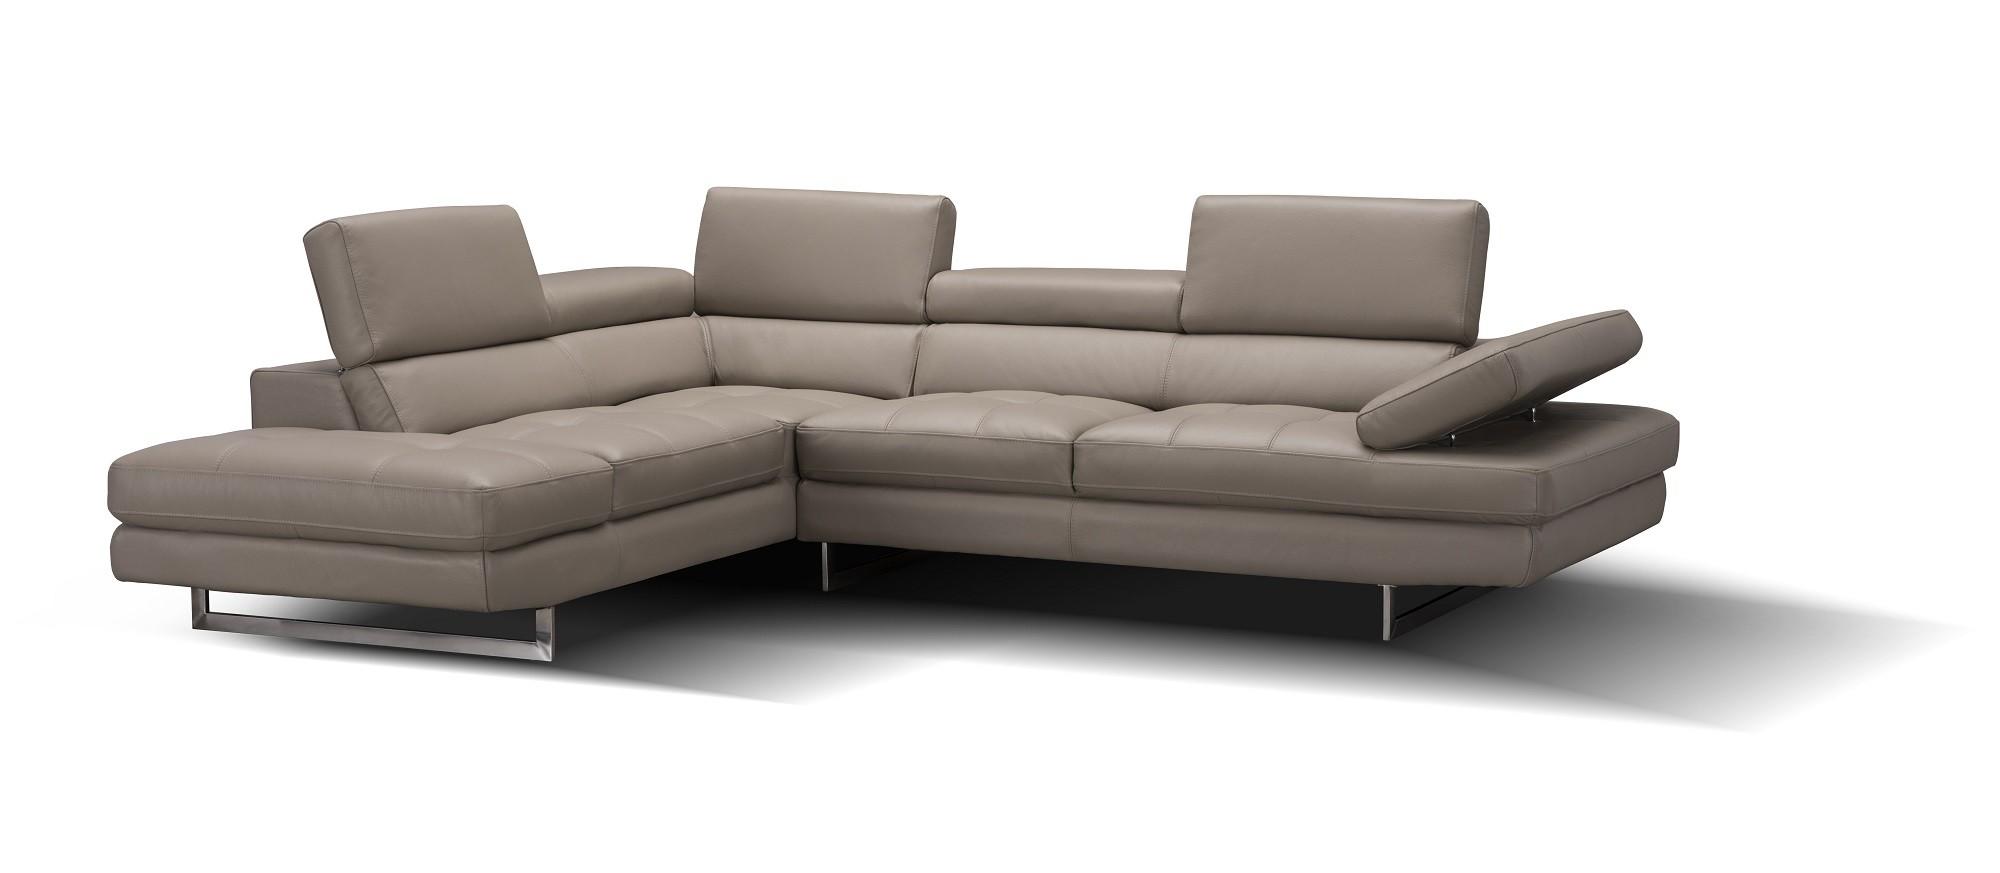 Contemporary Sectional Sofa A761 SKU1785523 in Tan Italian Leather